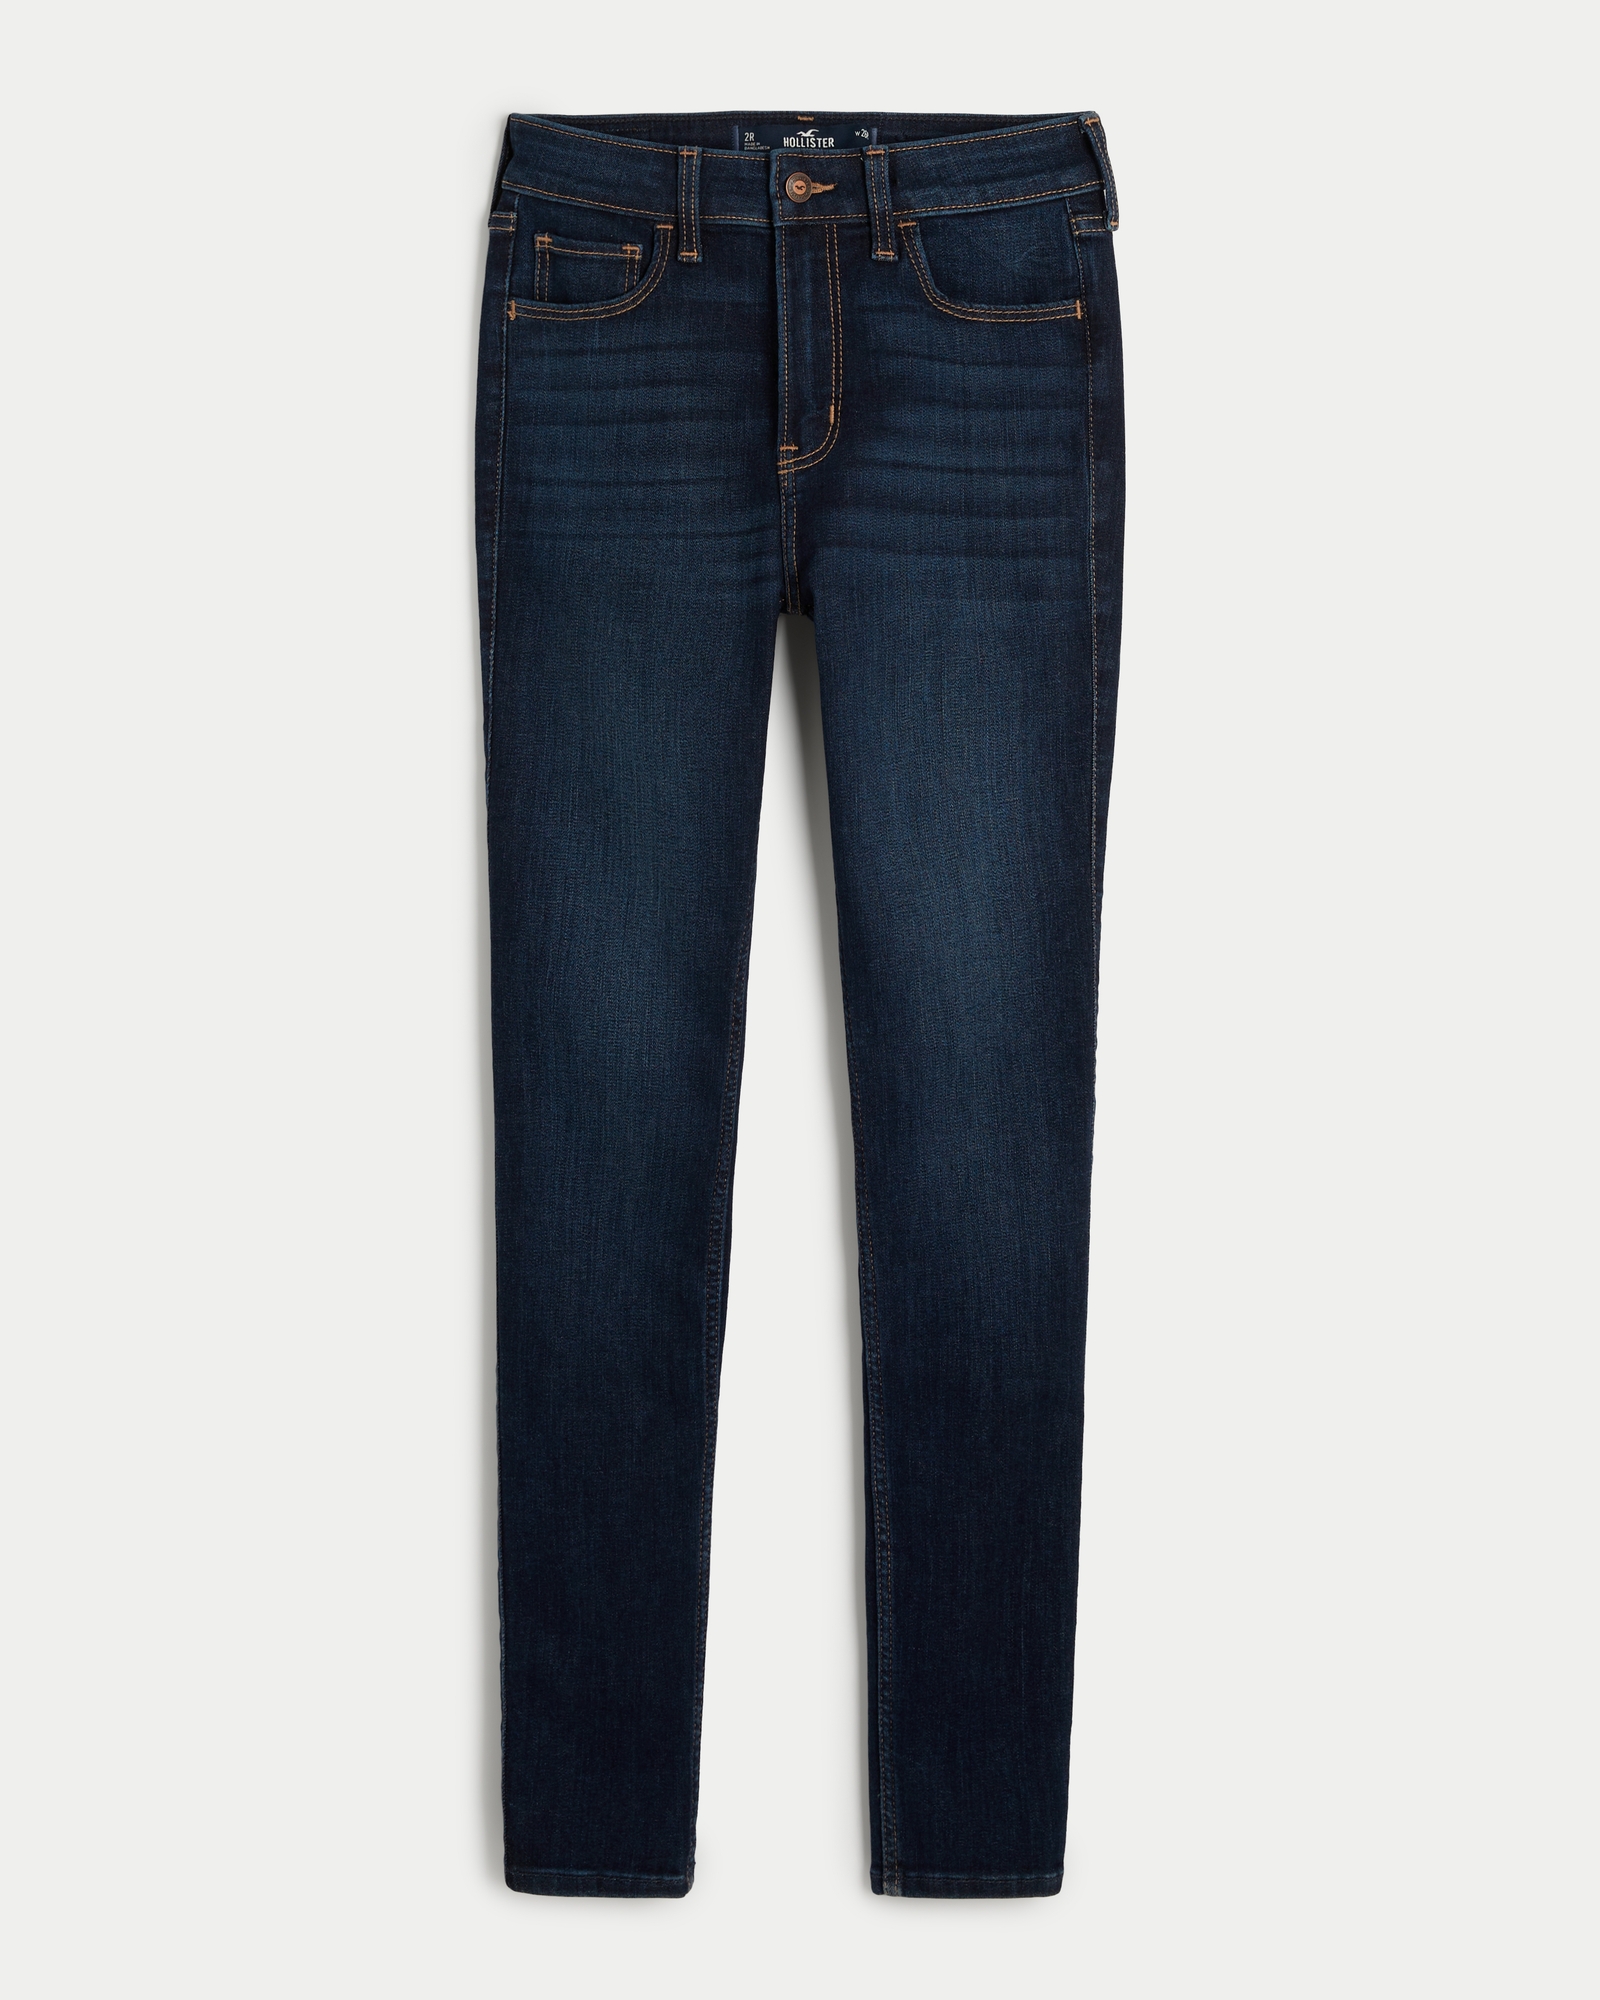 https://img.hollisterco.com/is/image/anf/KIC_355-2200-0555-276_prod1.jpg?policy=product-extra-large